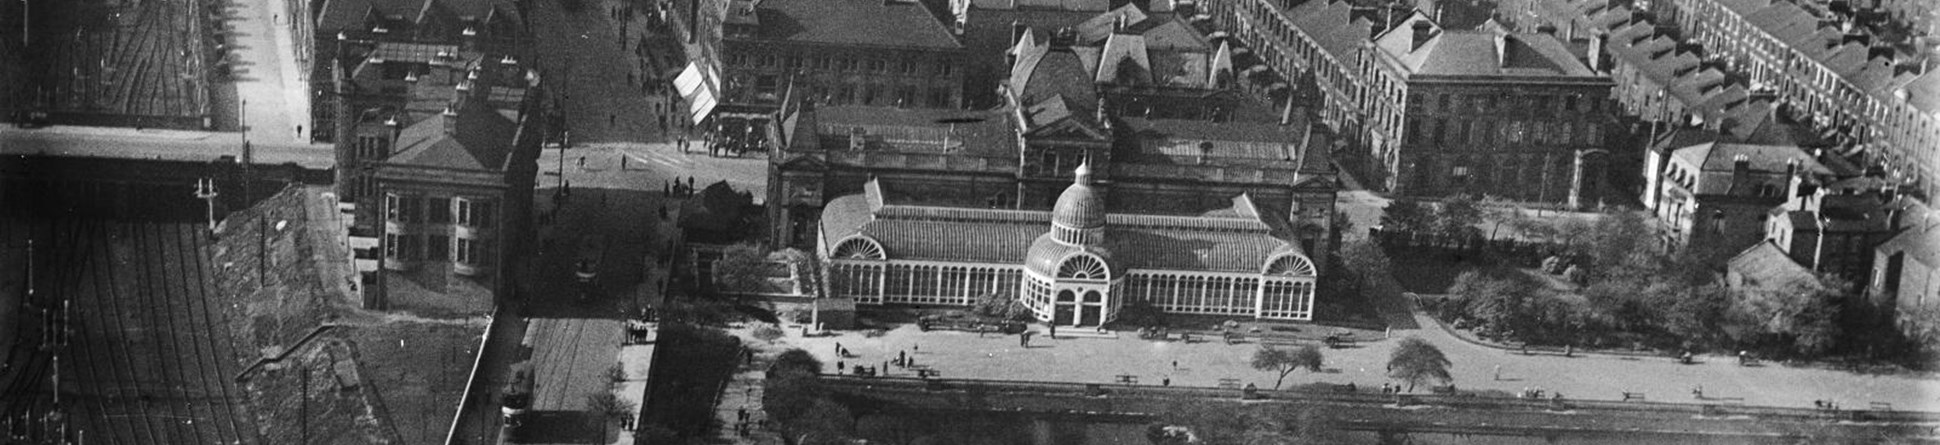 Old black and white photo showing an aerial view of the Winter Gardens.